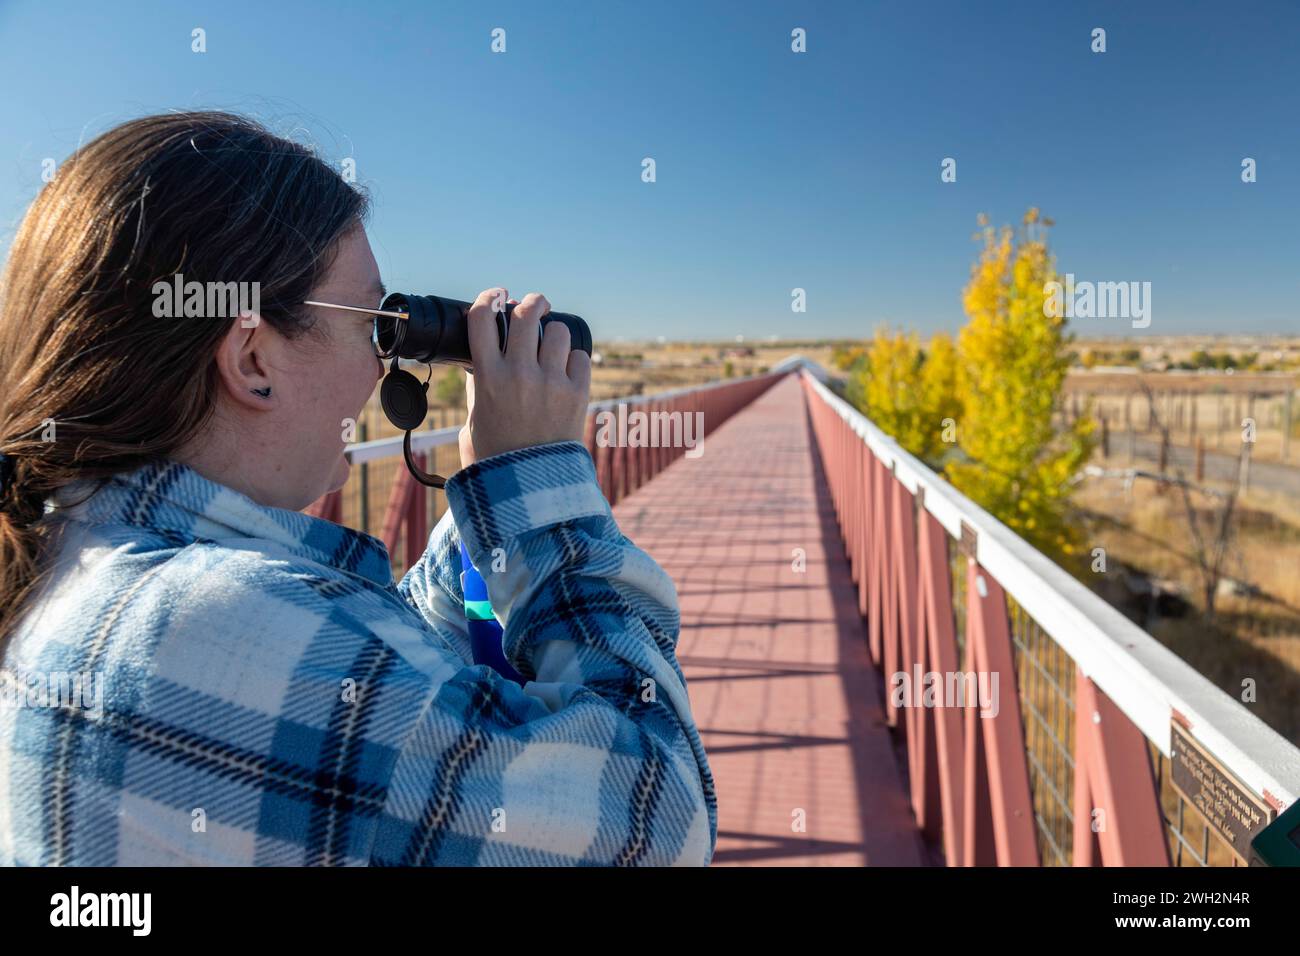 Keenesburg, Colorado - A visitor looks for animals at the Wild Animal Sanctuary, a nonprofit that rescues animals that have been abused or held illega Stock Photo